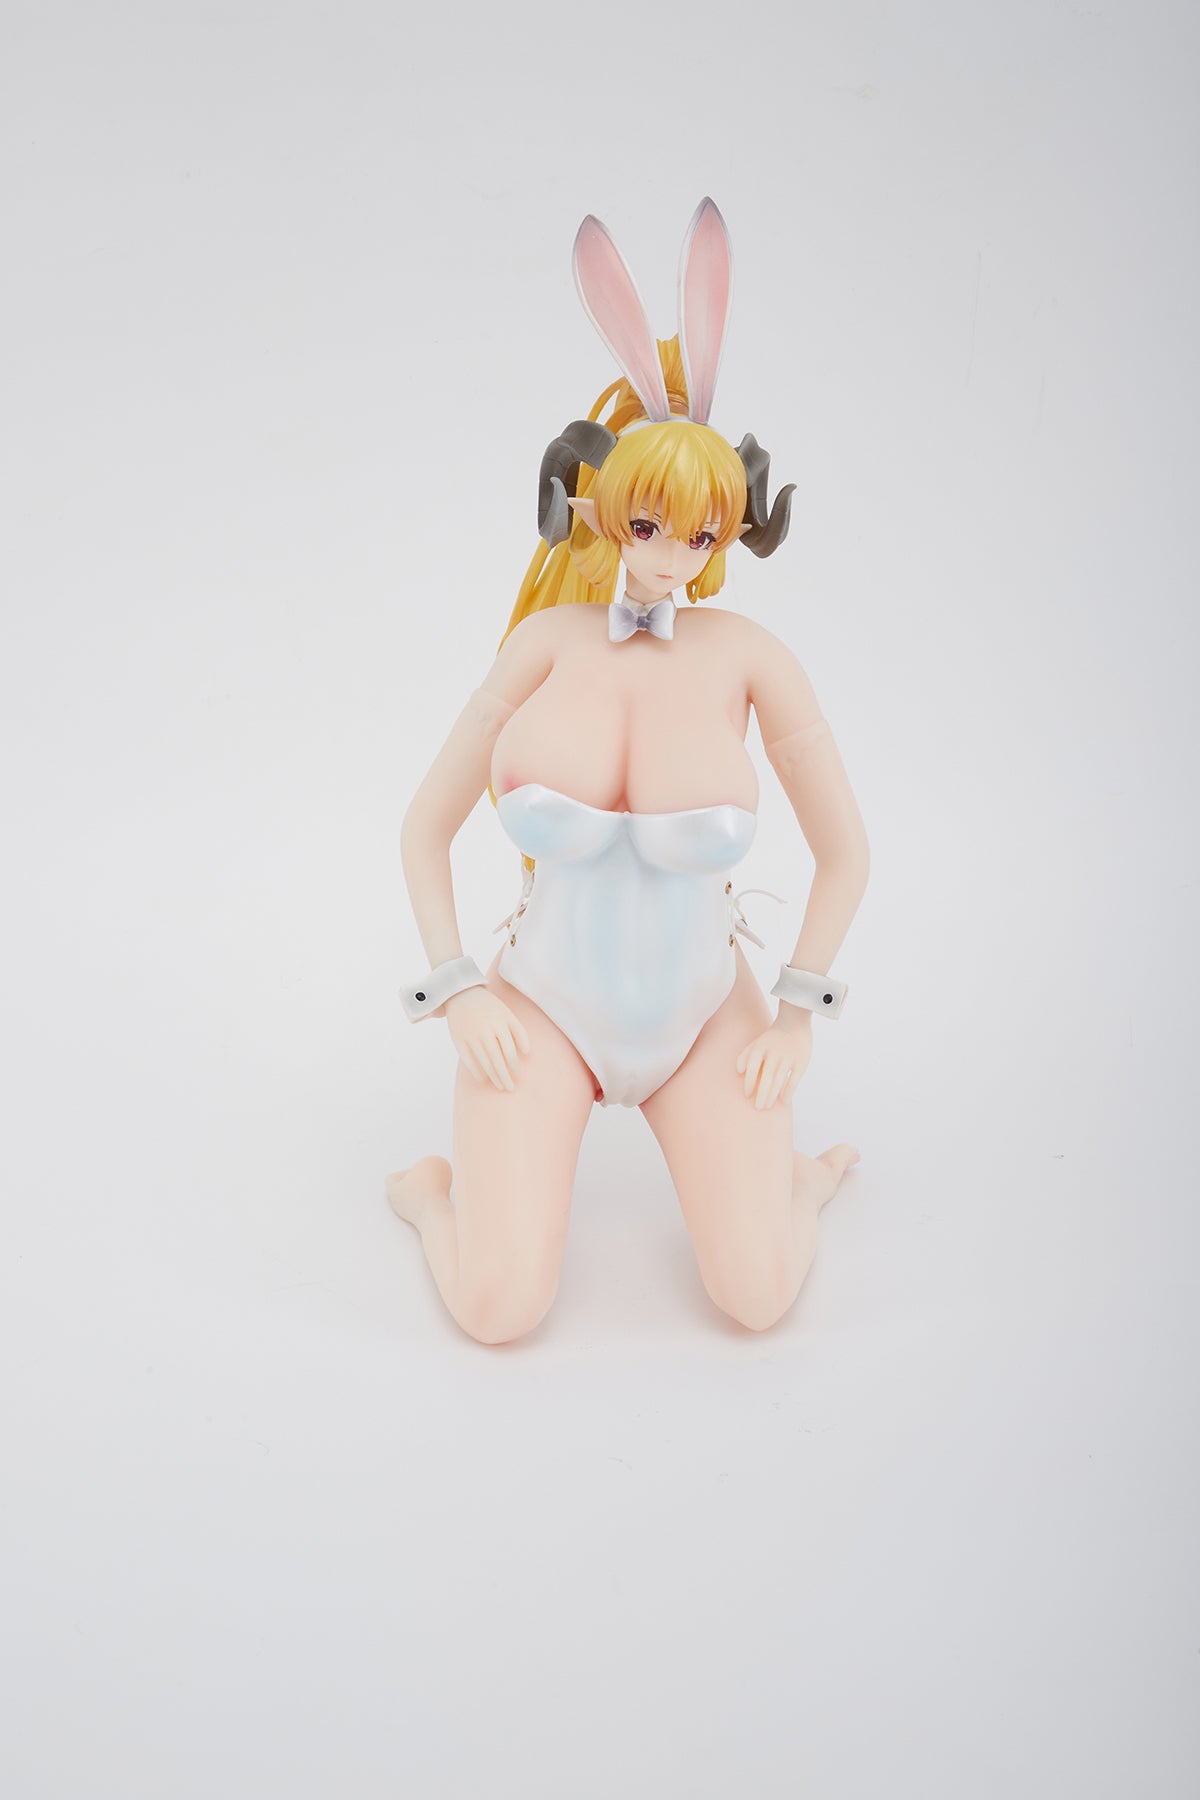 Sin Seven Deadly Sins Lucifer adult figure sex doll love doll silicone doll anime adult toys men